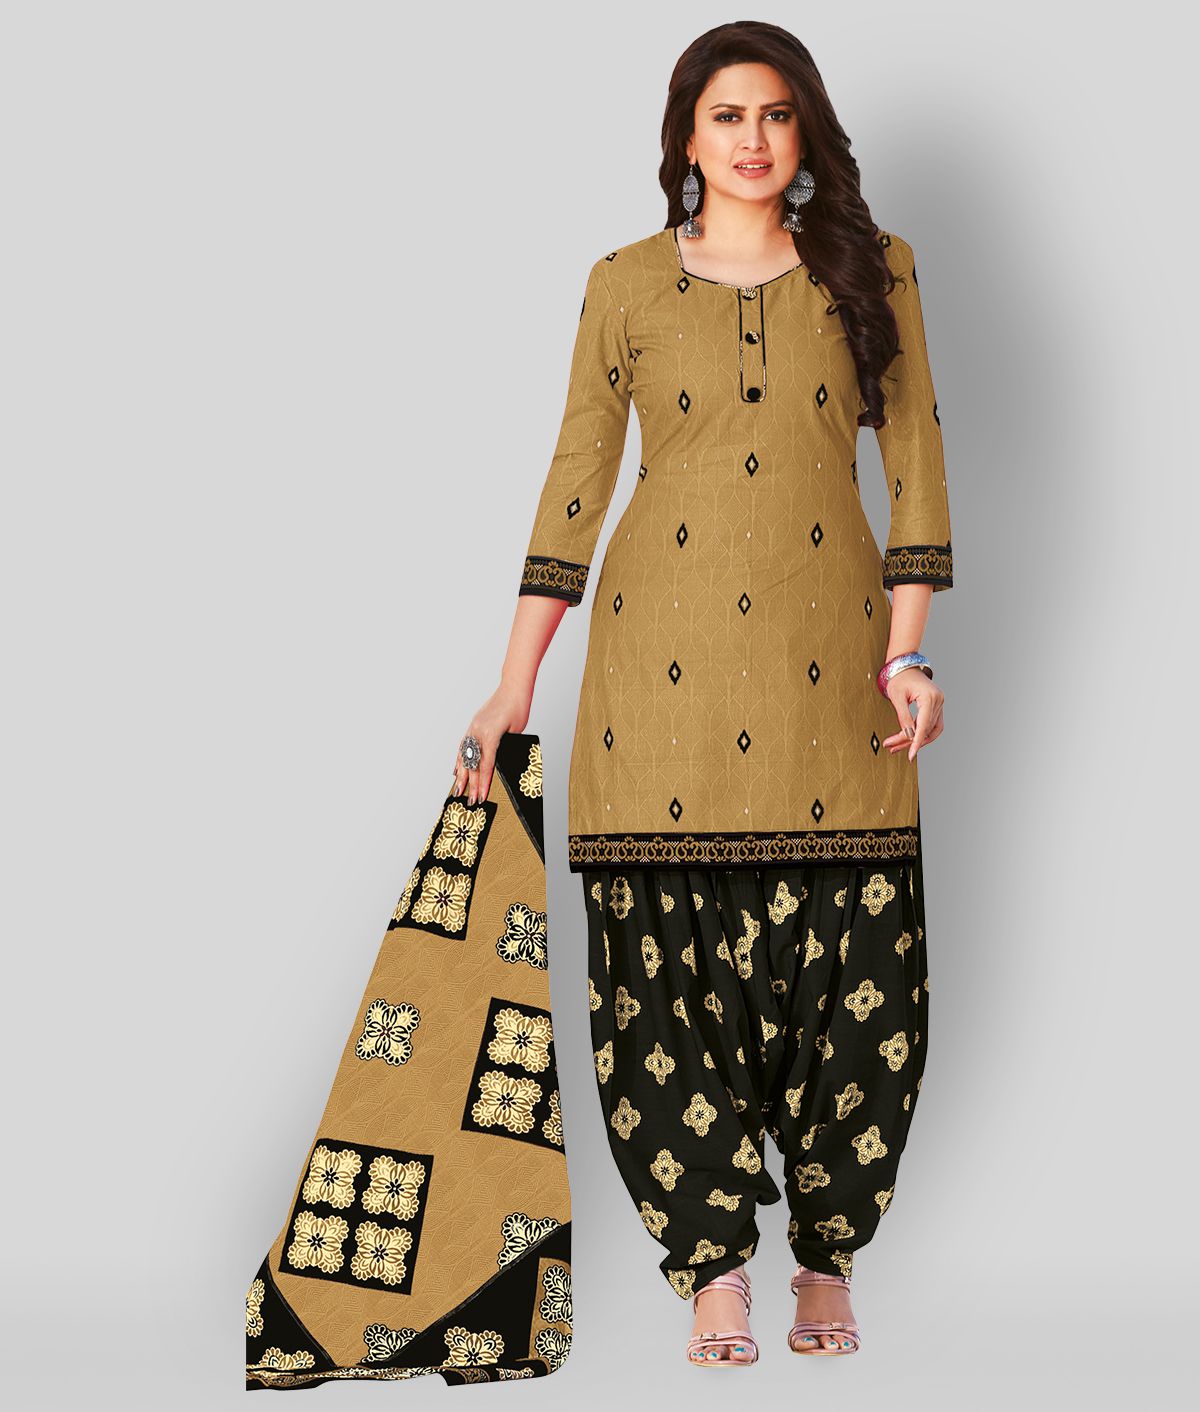 shree jeenmata collection - Mustard Straight Cotton Women's Stitched Salwar Suit ( Pack of 1 )